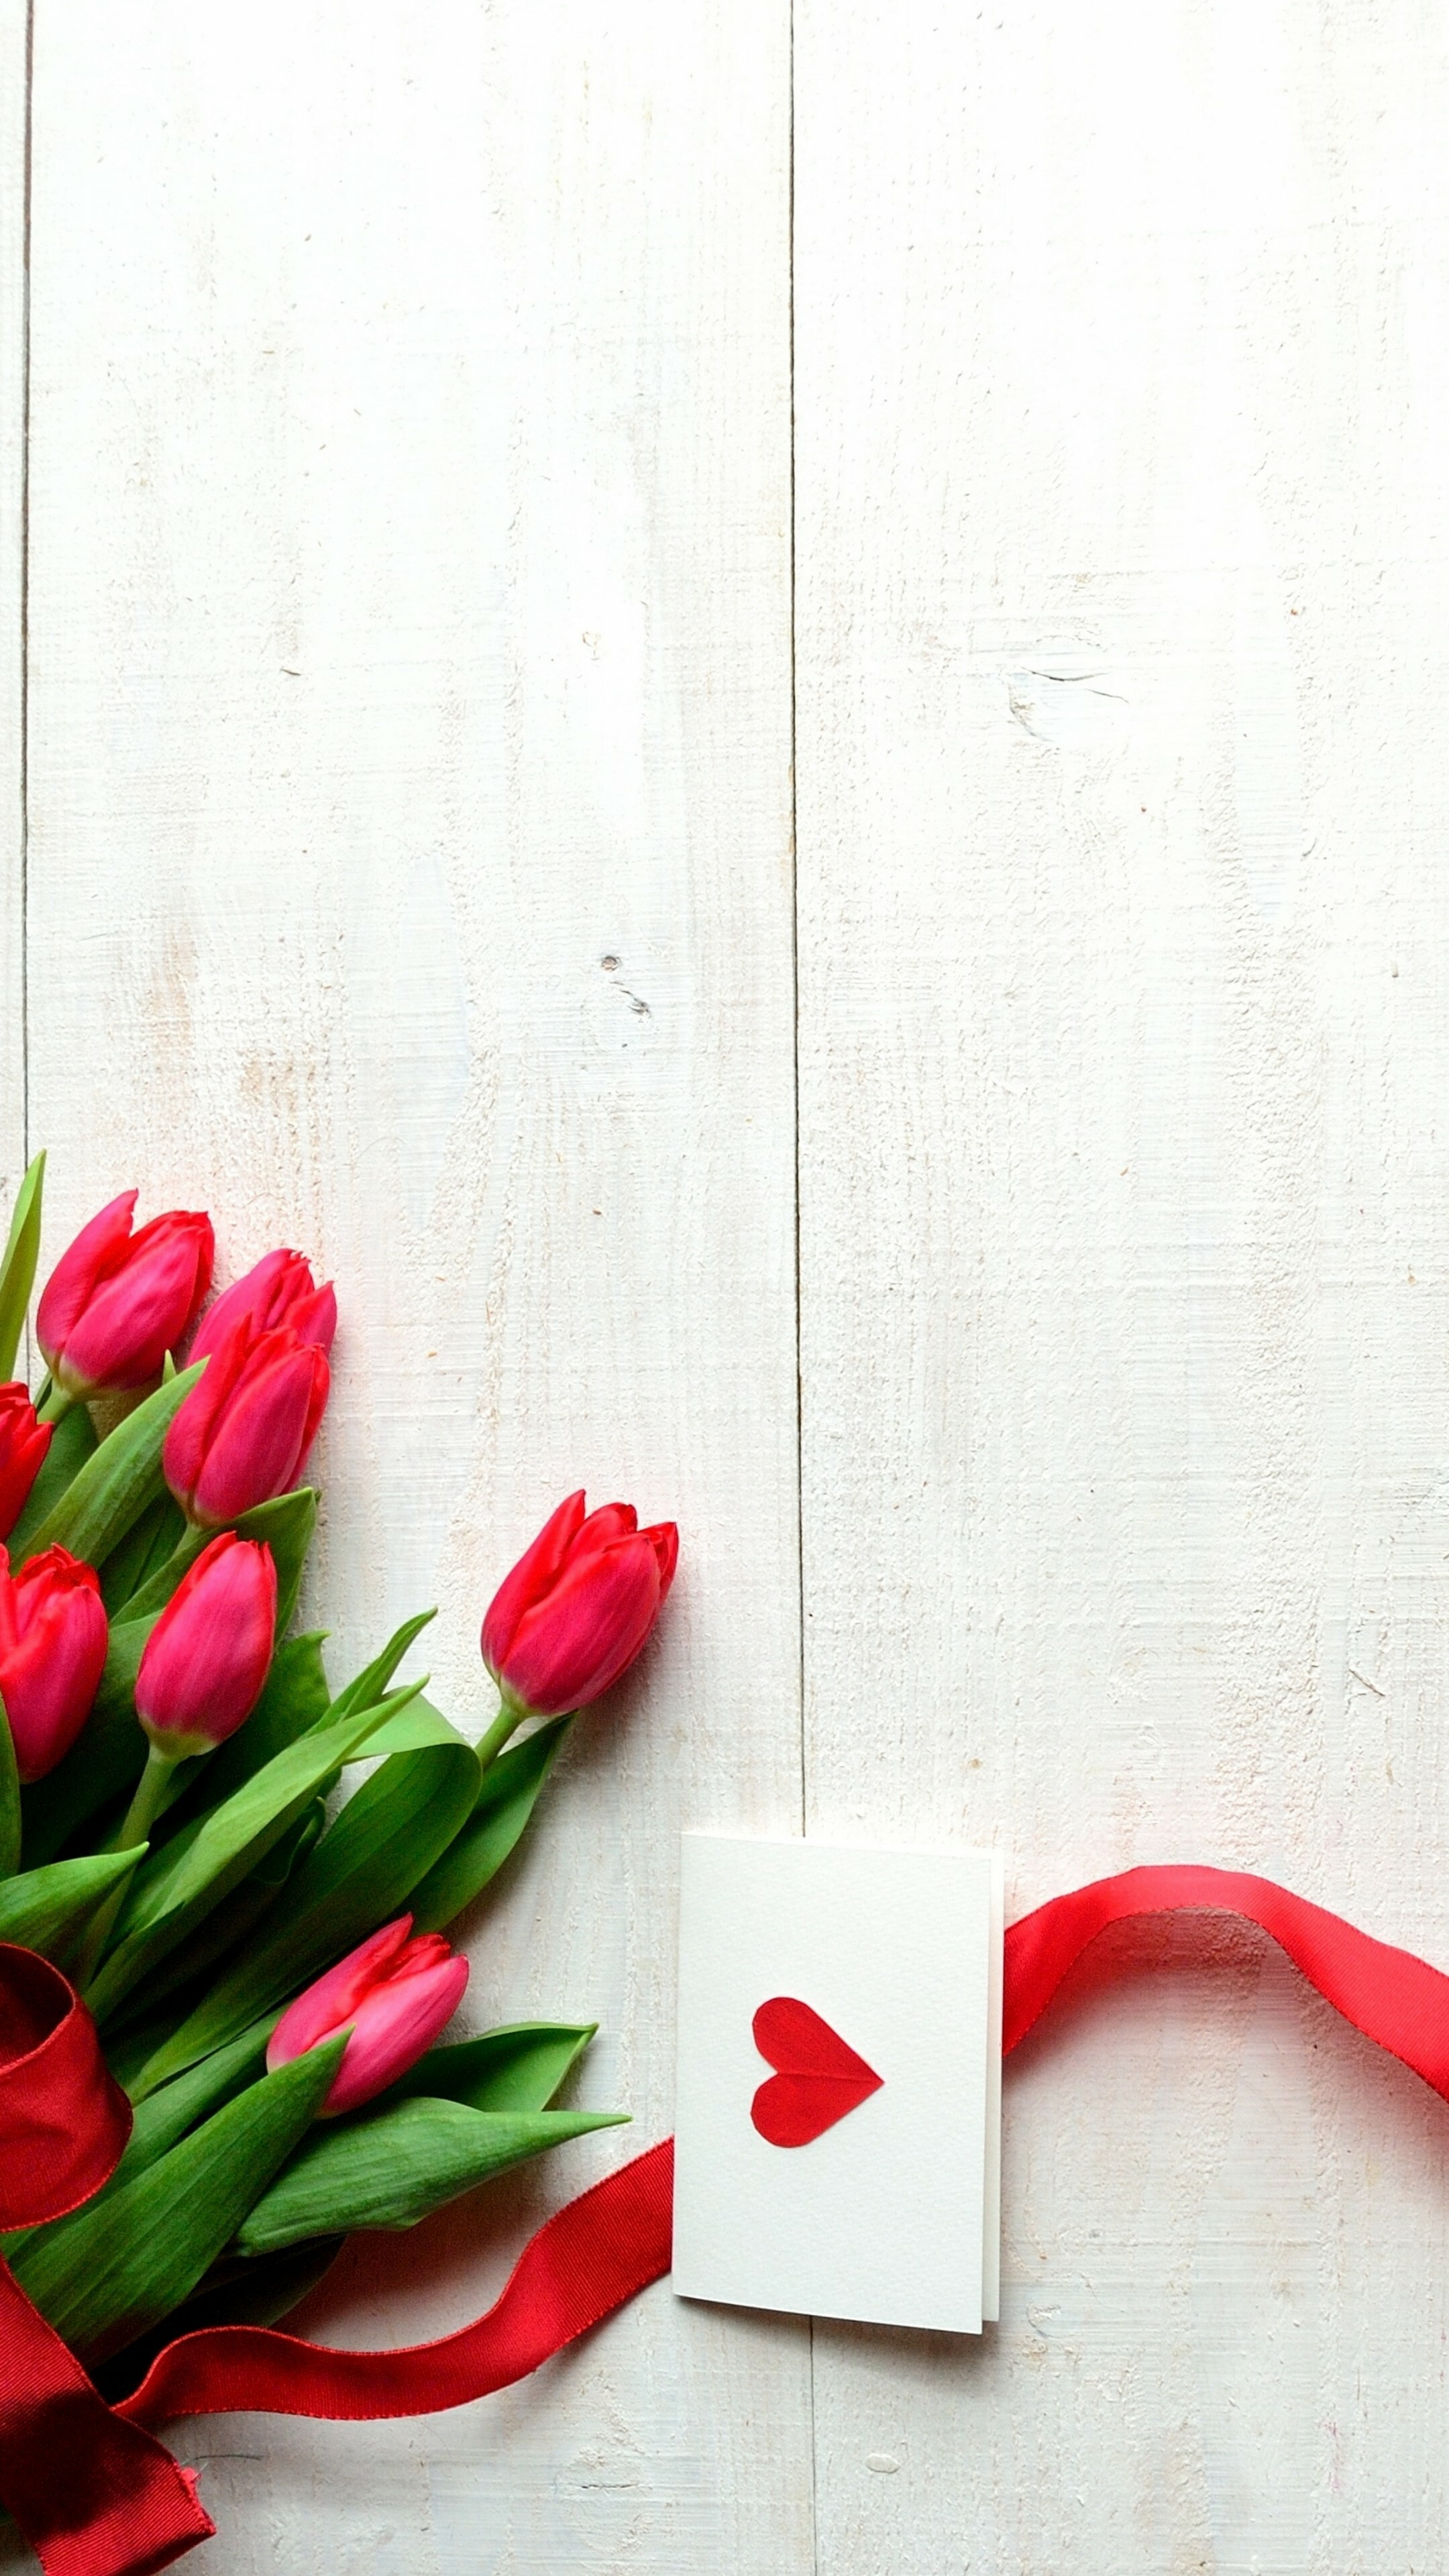 Valentine's Day: Time to celebrate romance, Messages of love. 2160x3840 4K Wallpaper.